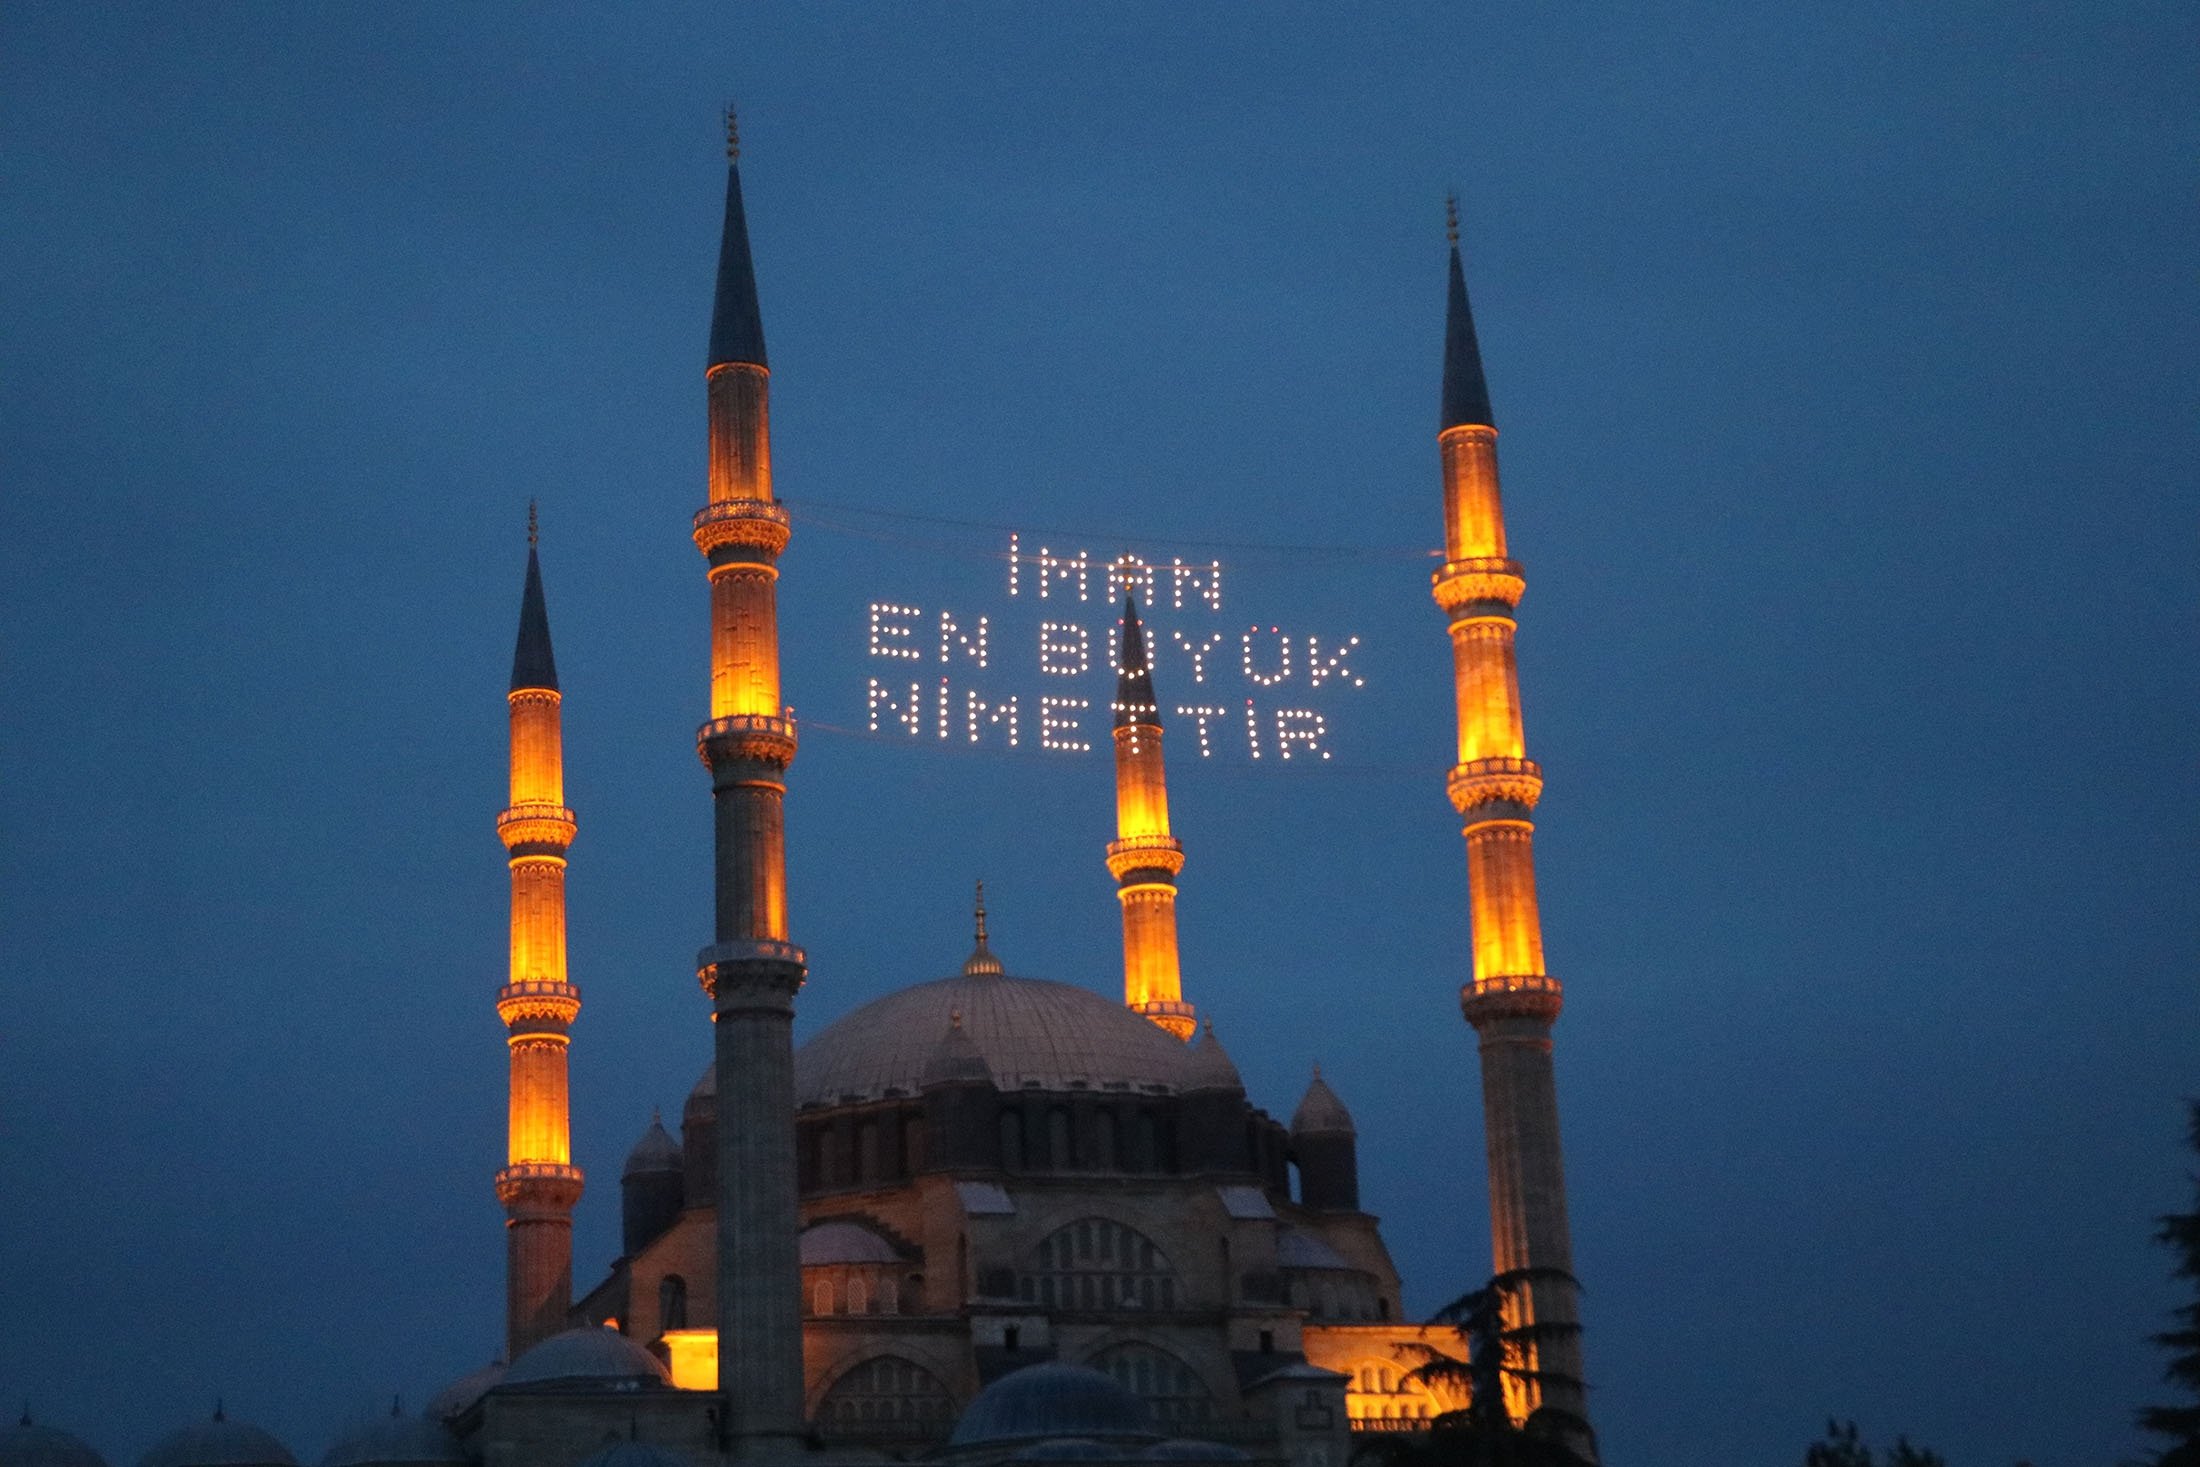 The historic Selimiye Mosque is adorned with 